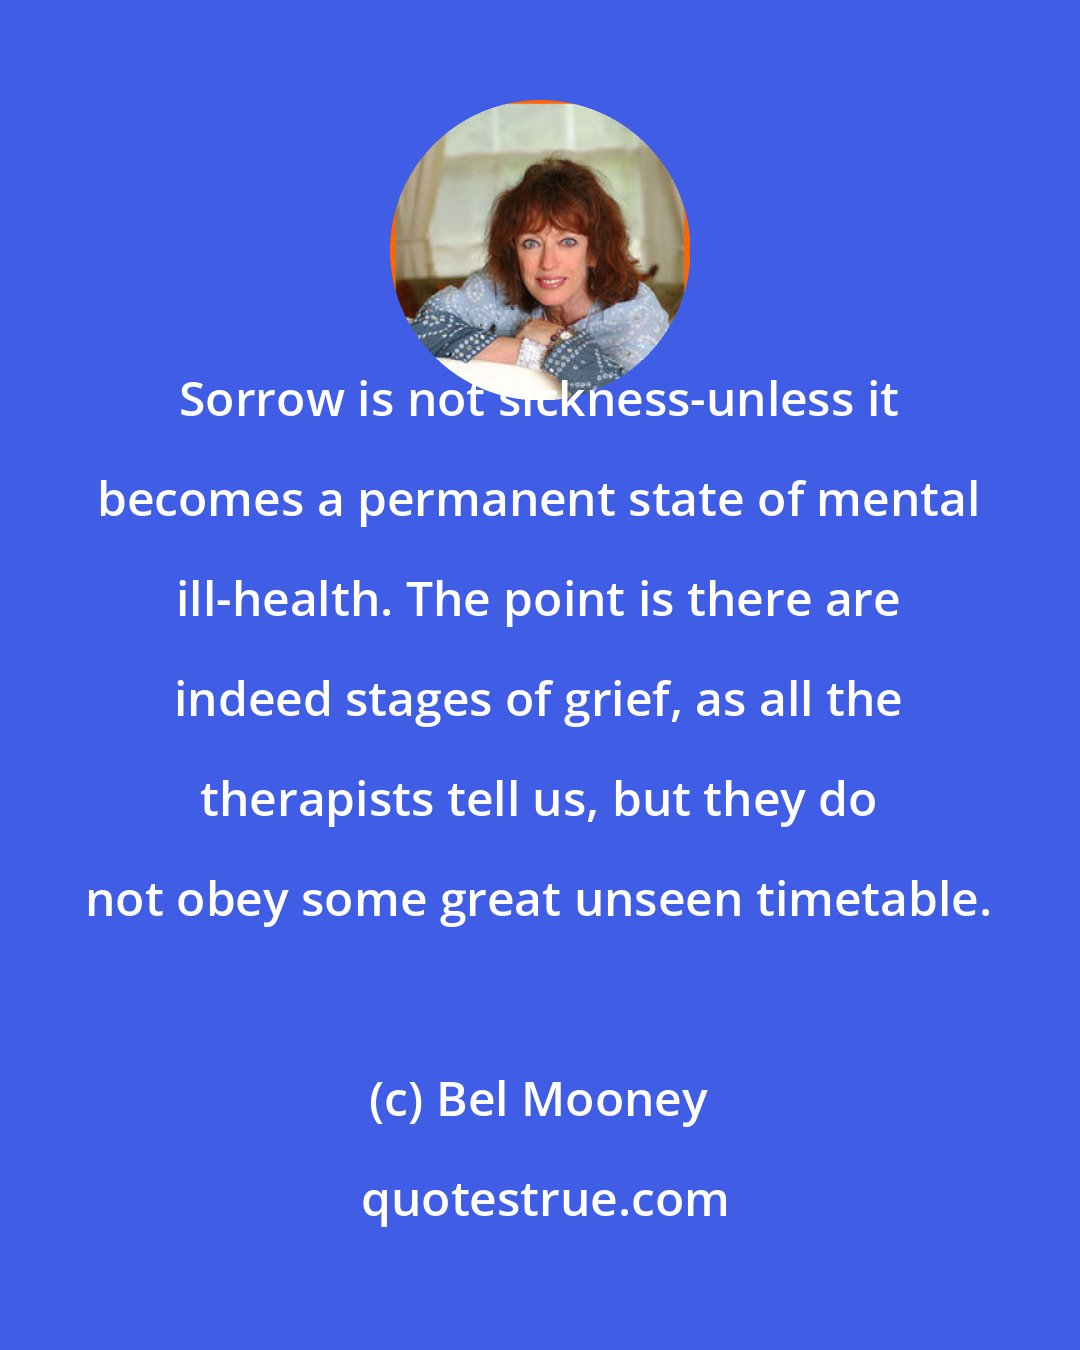 Bel Mooney: Sorrow is not sickness-unless it becomes a permanent state of mental ill-health. The point is there are indeed stages of grief, as all the therapists tell us, but they do not obey some great unseen timetable.